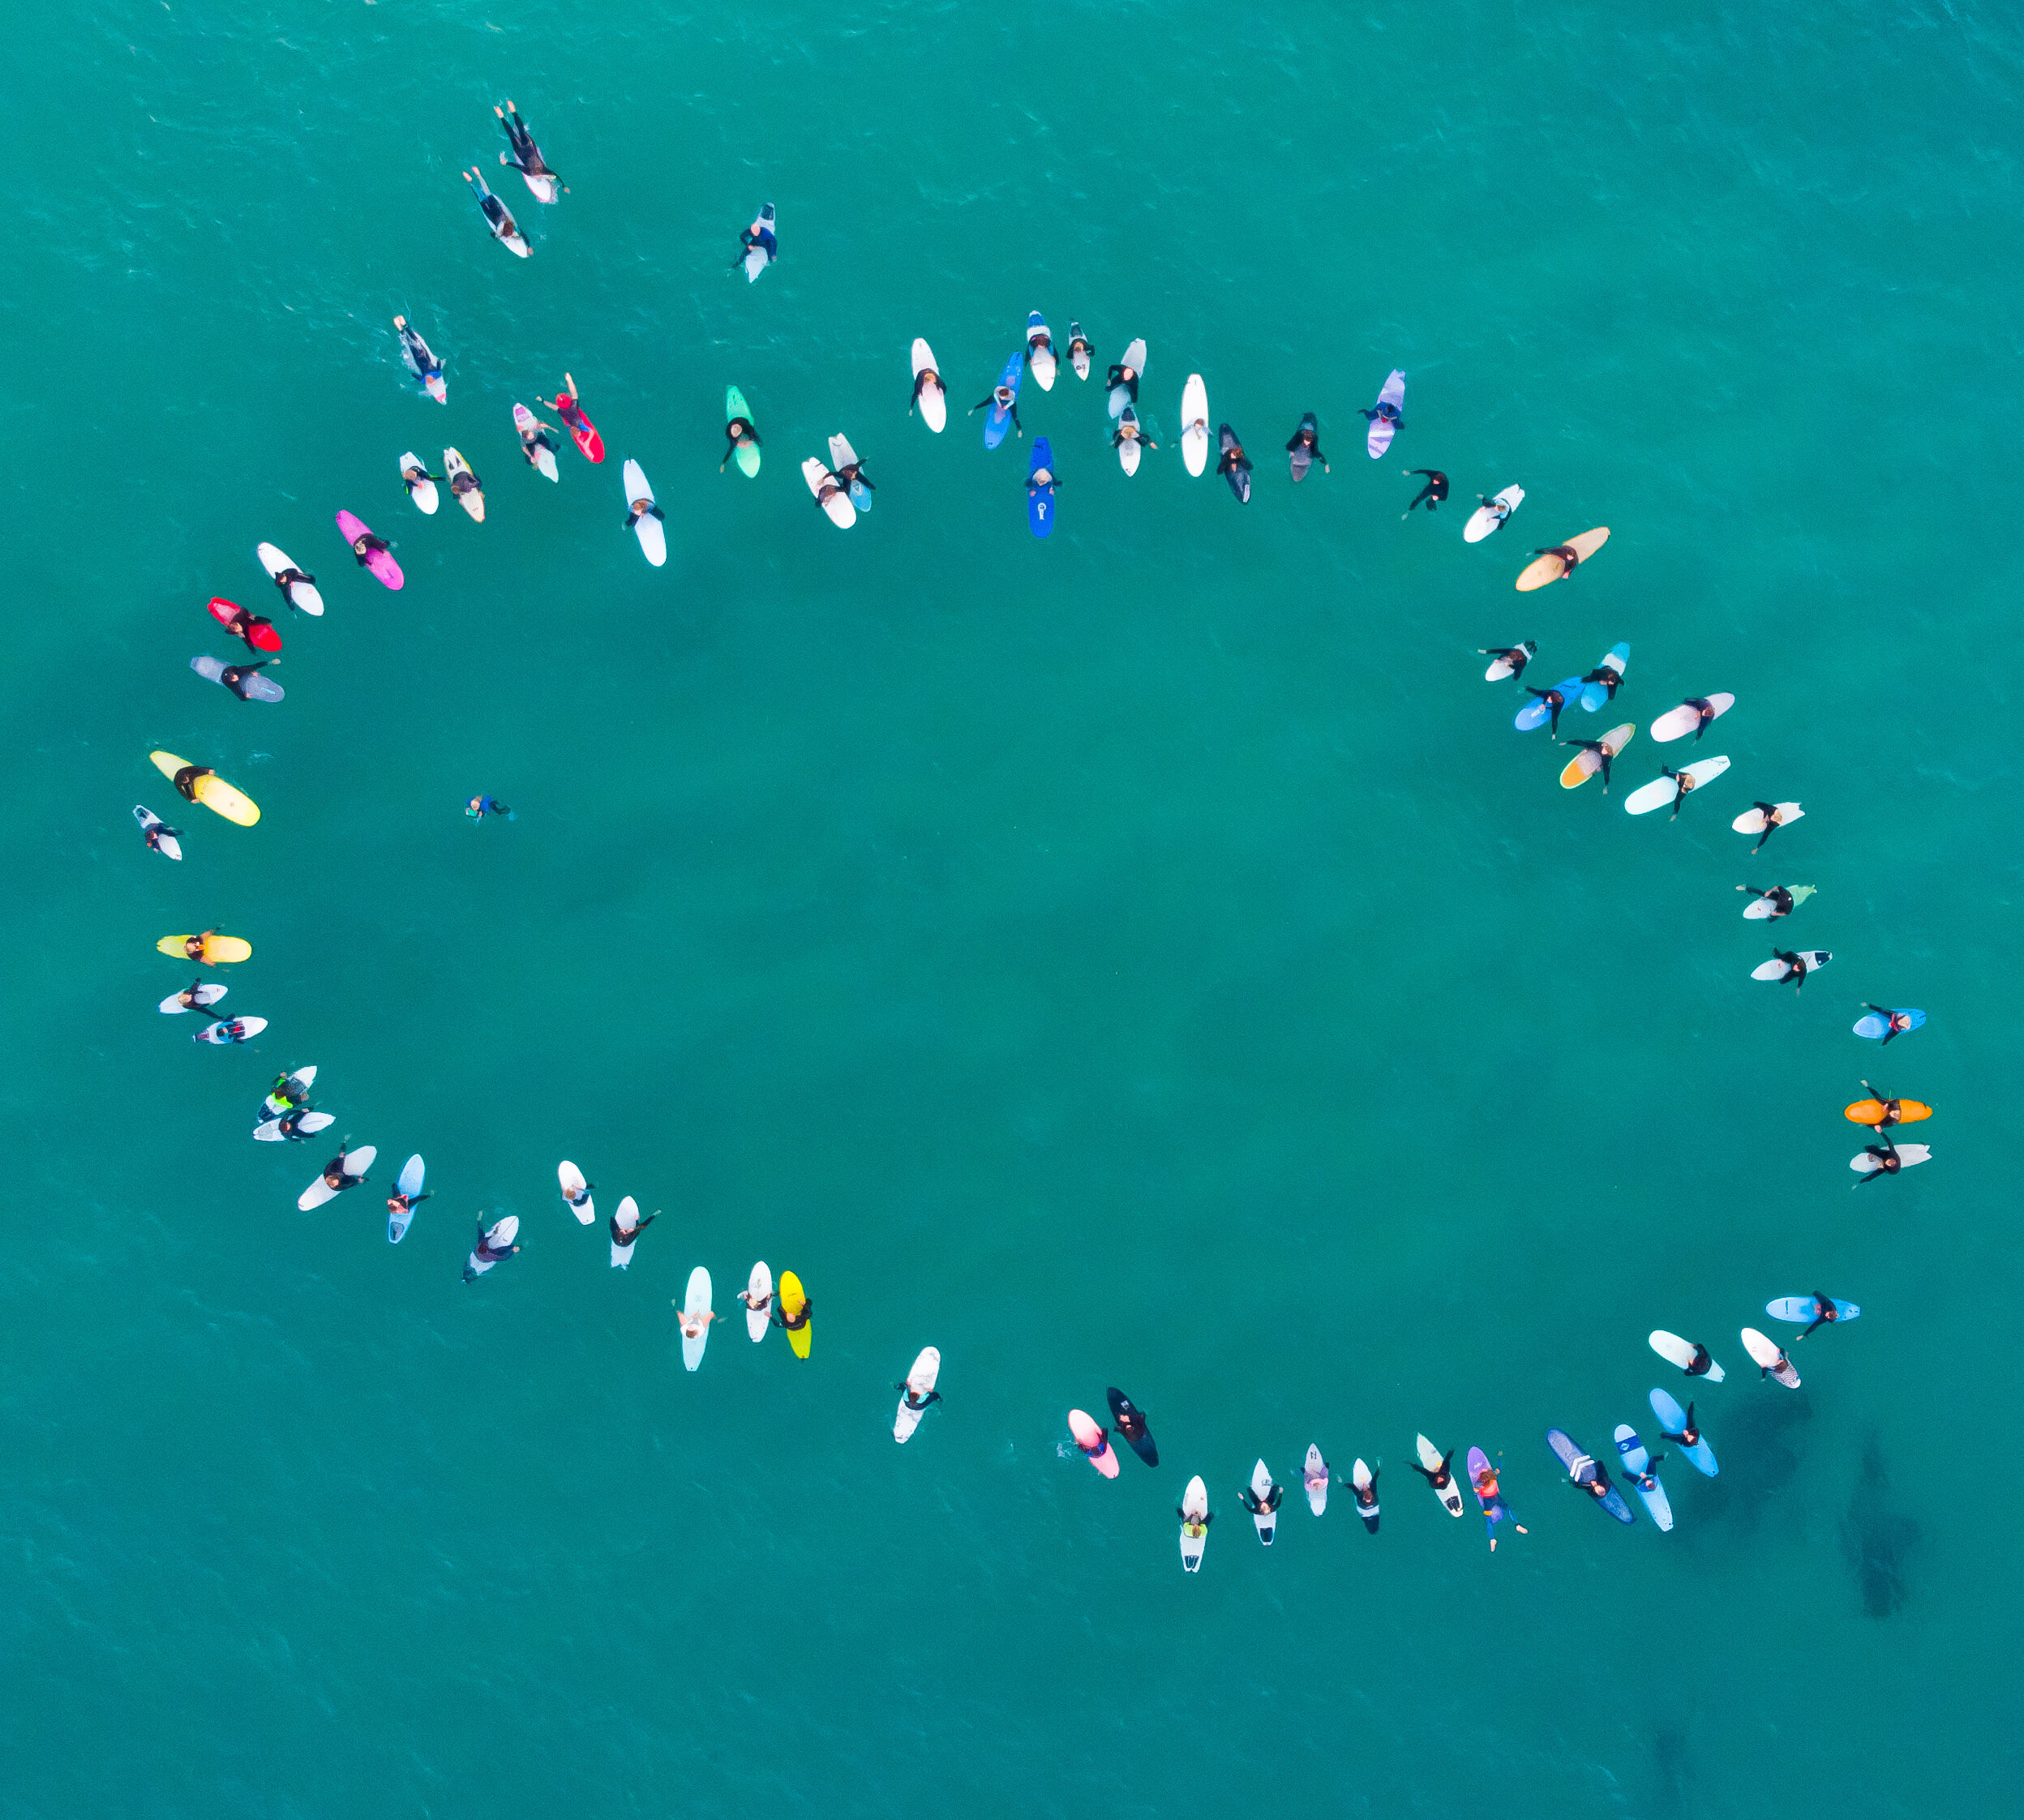 Paddle outs for Solidarity in Surf - Australians Paddle Out Against ...